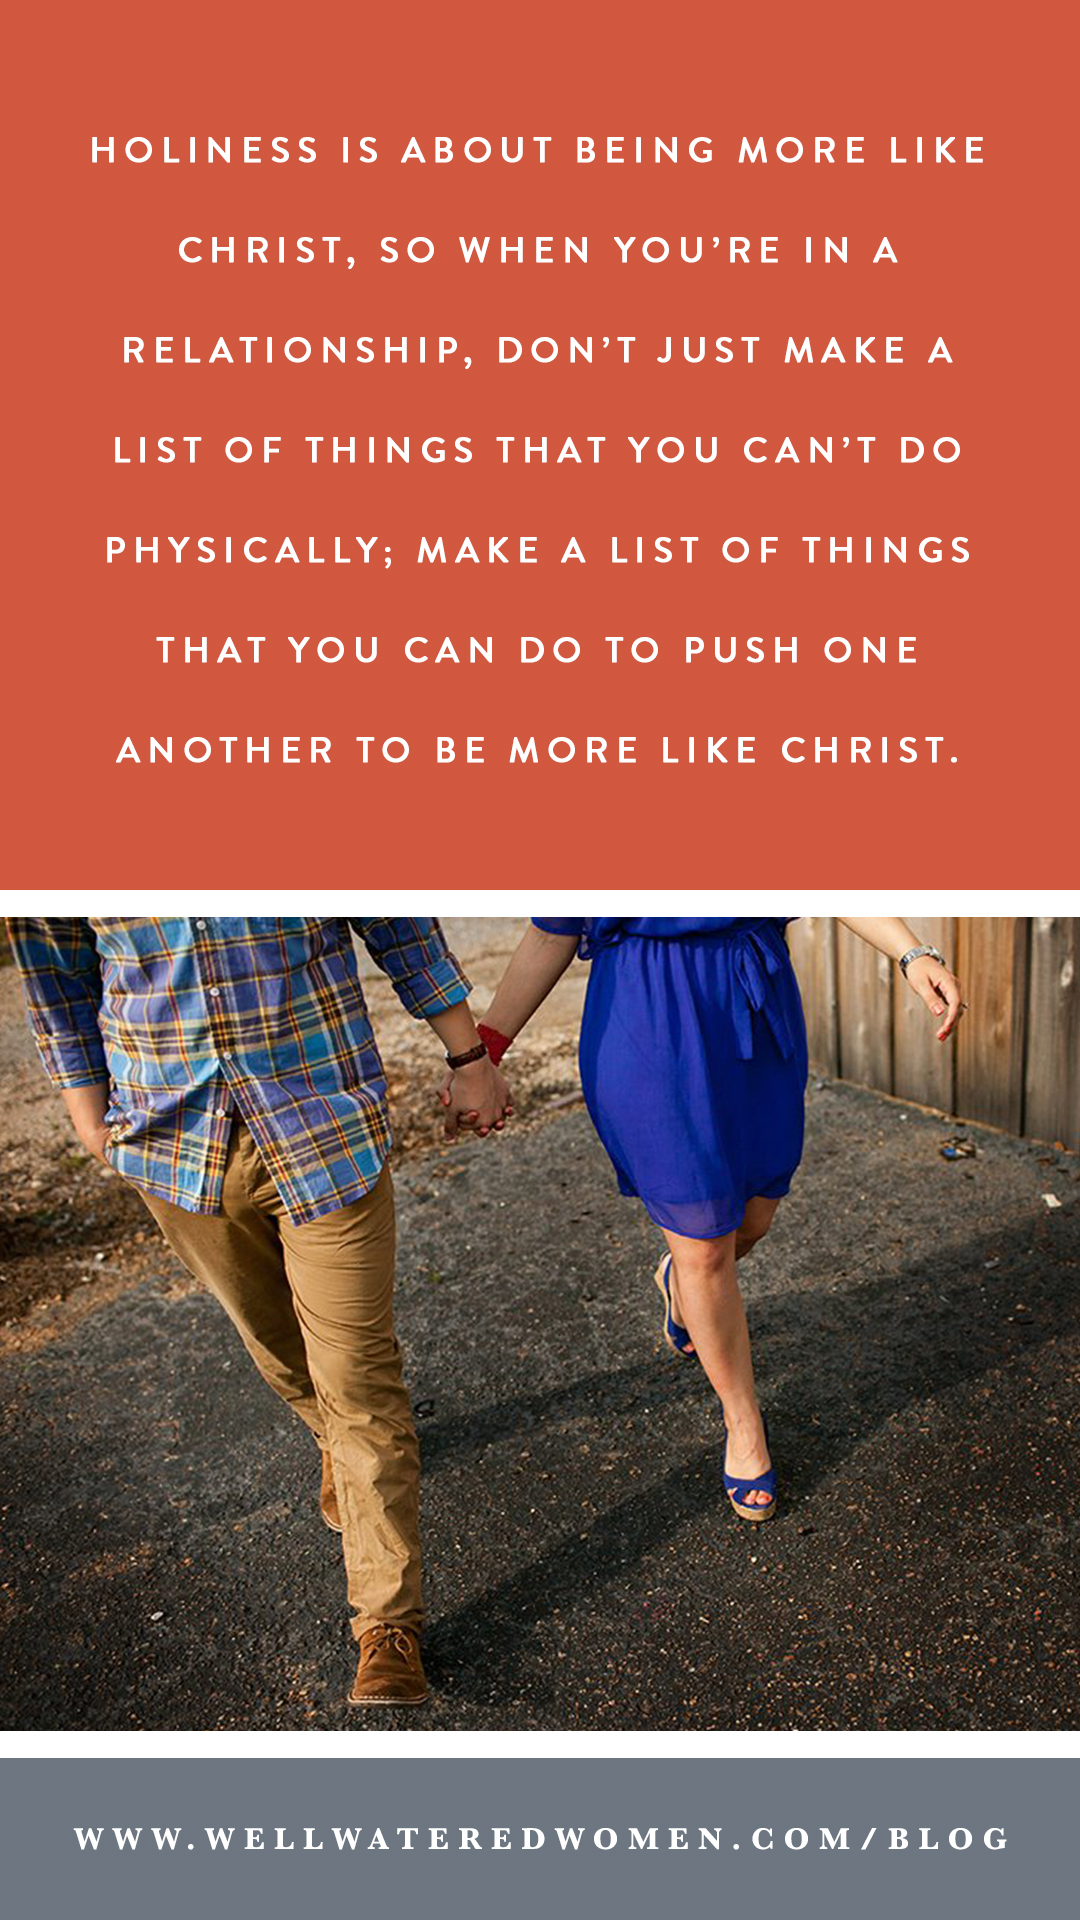 Well-Watered Women, Behind Closed Doors: Dating and Boundaries | Holiness is about being more like Christ, so when you’re in a relationship, don’t just make a list of things that you can’t do physically; make a list of things that you can do to push one another to be more like Christ.